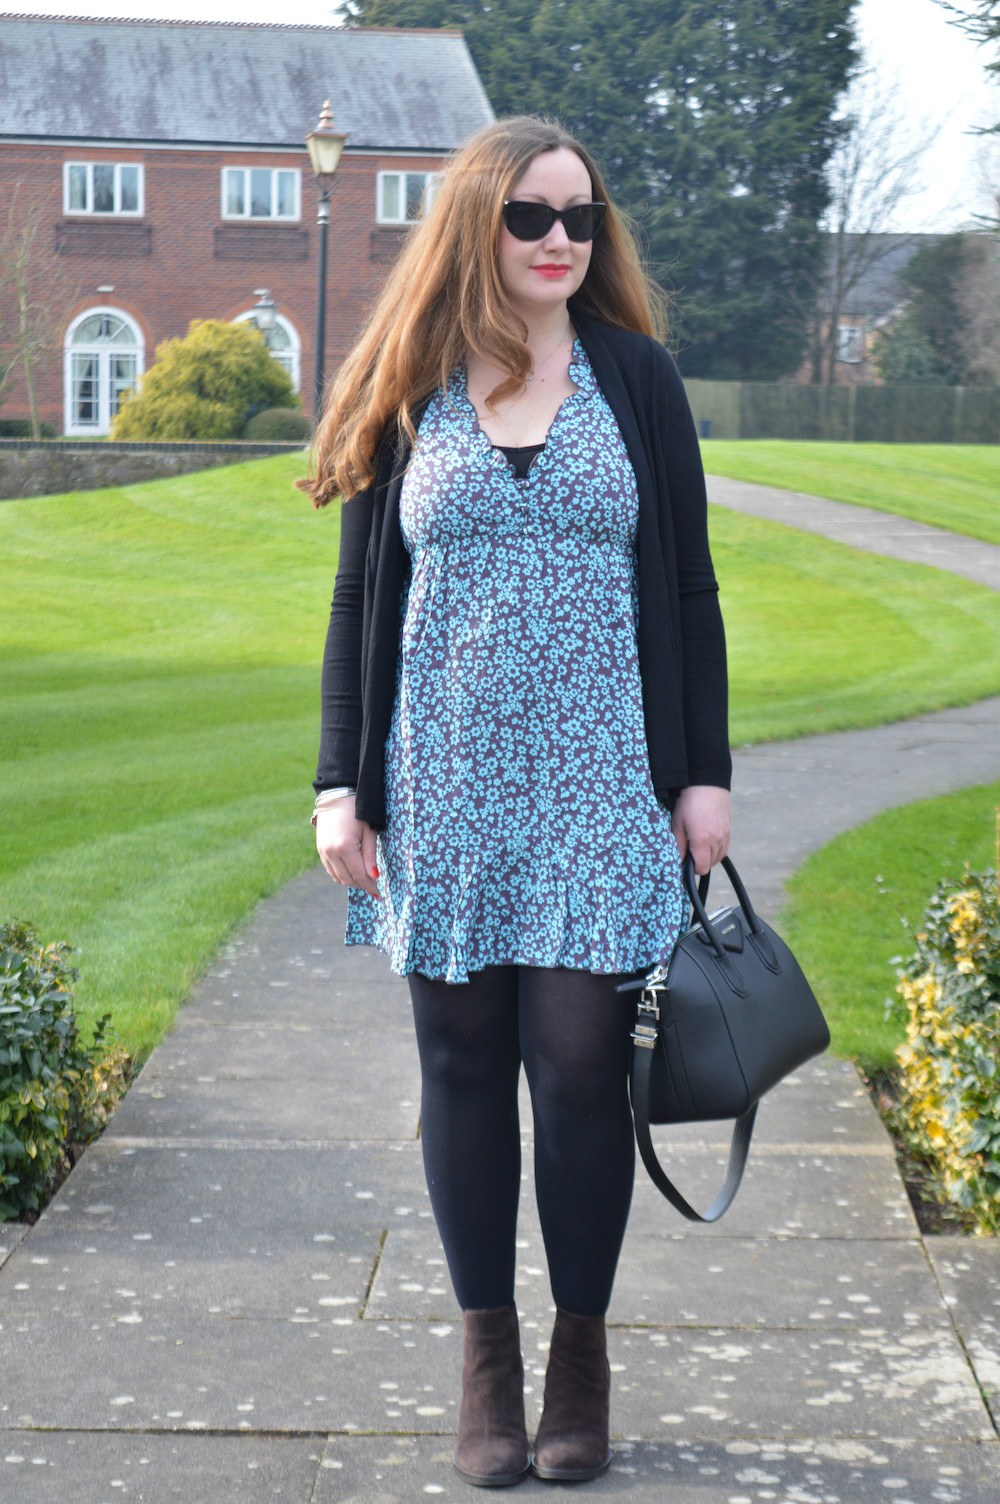 Daytime outfit ideas for mums